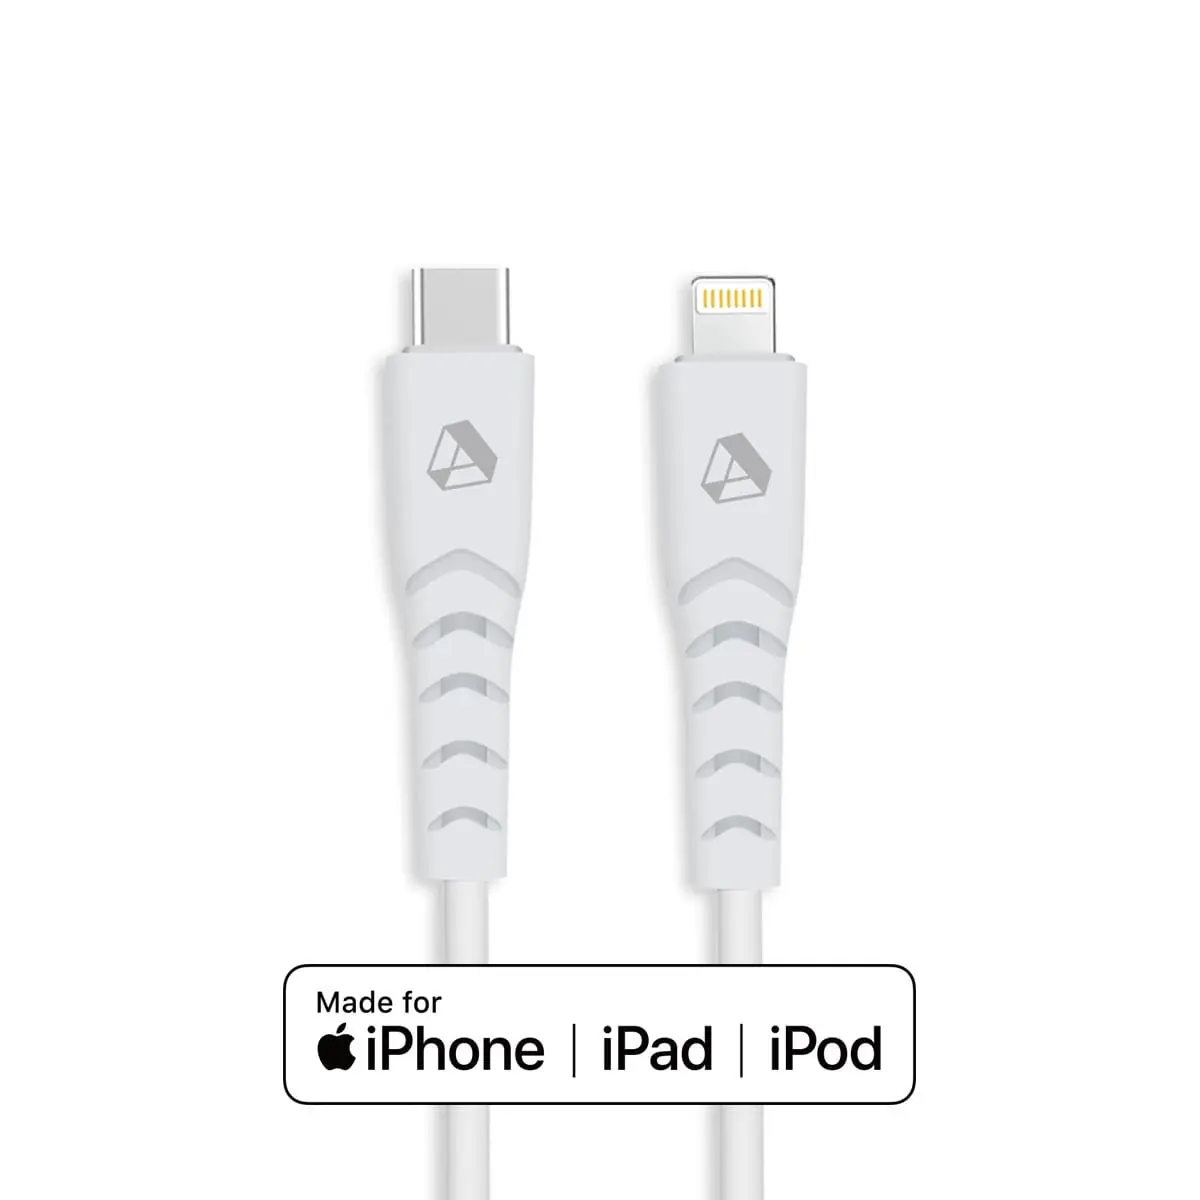 The Benefits of Switching to Adreama's Eco-friendly Lightning to USB-C Cable - 1.5m